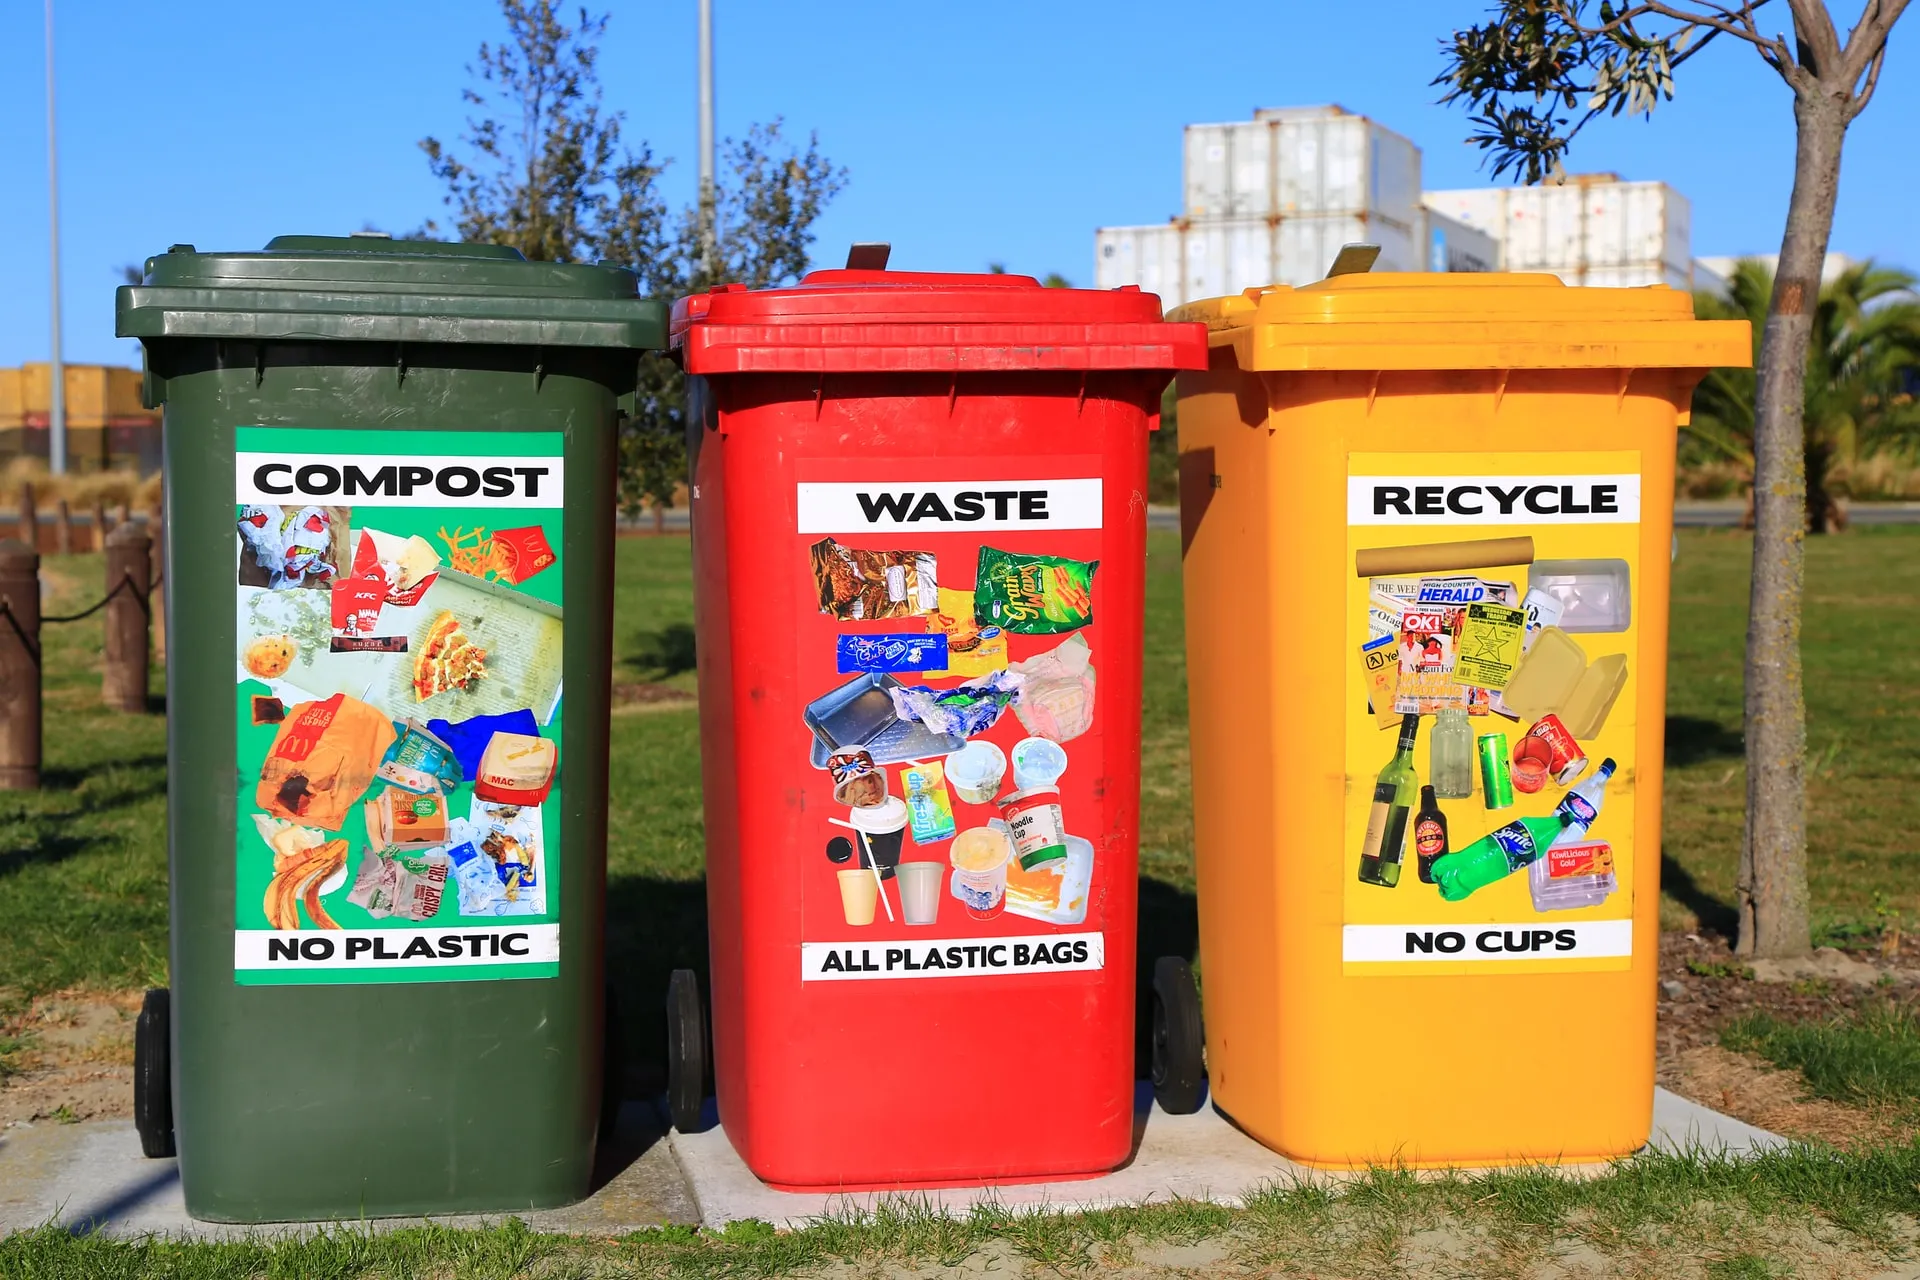 100% of organic waste in urban areas will be recycled